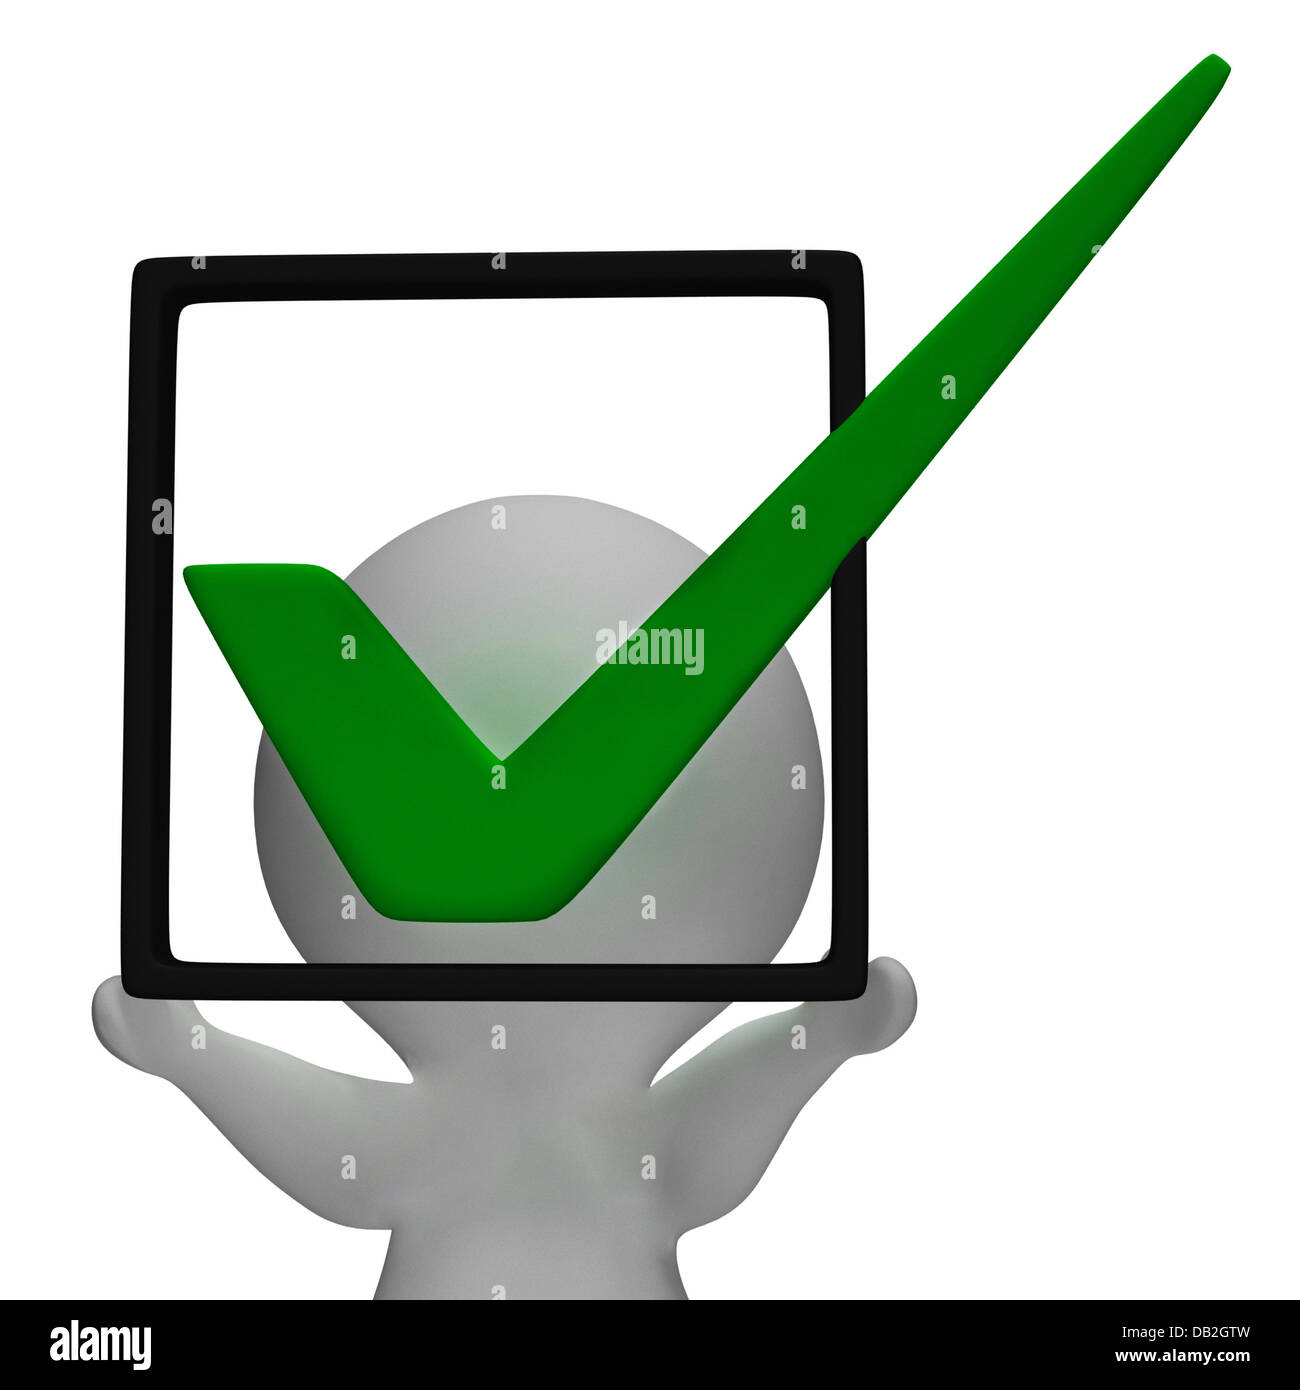 Holding Checkbox Or Check Box Shows Approval Or Checked Stock Photo